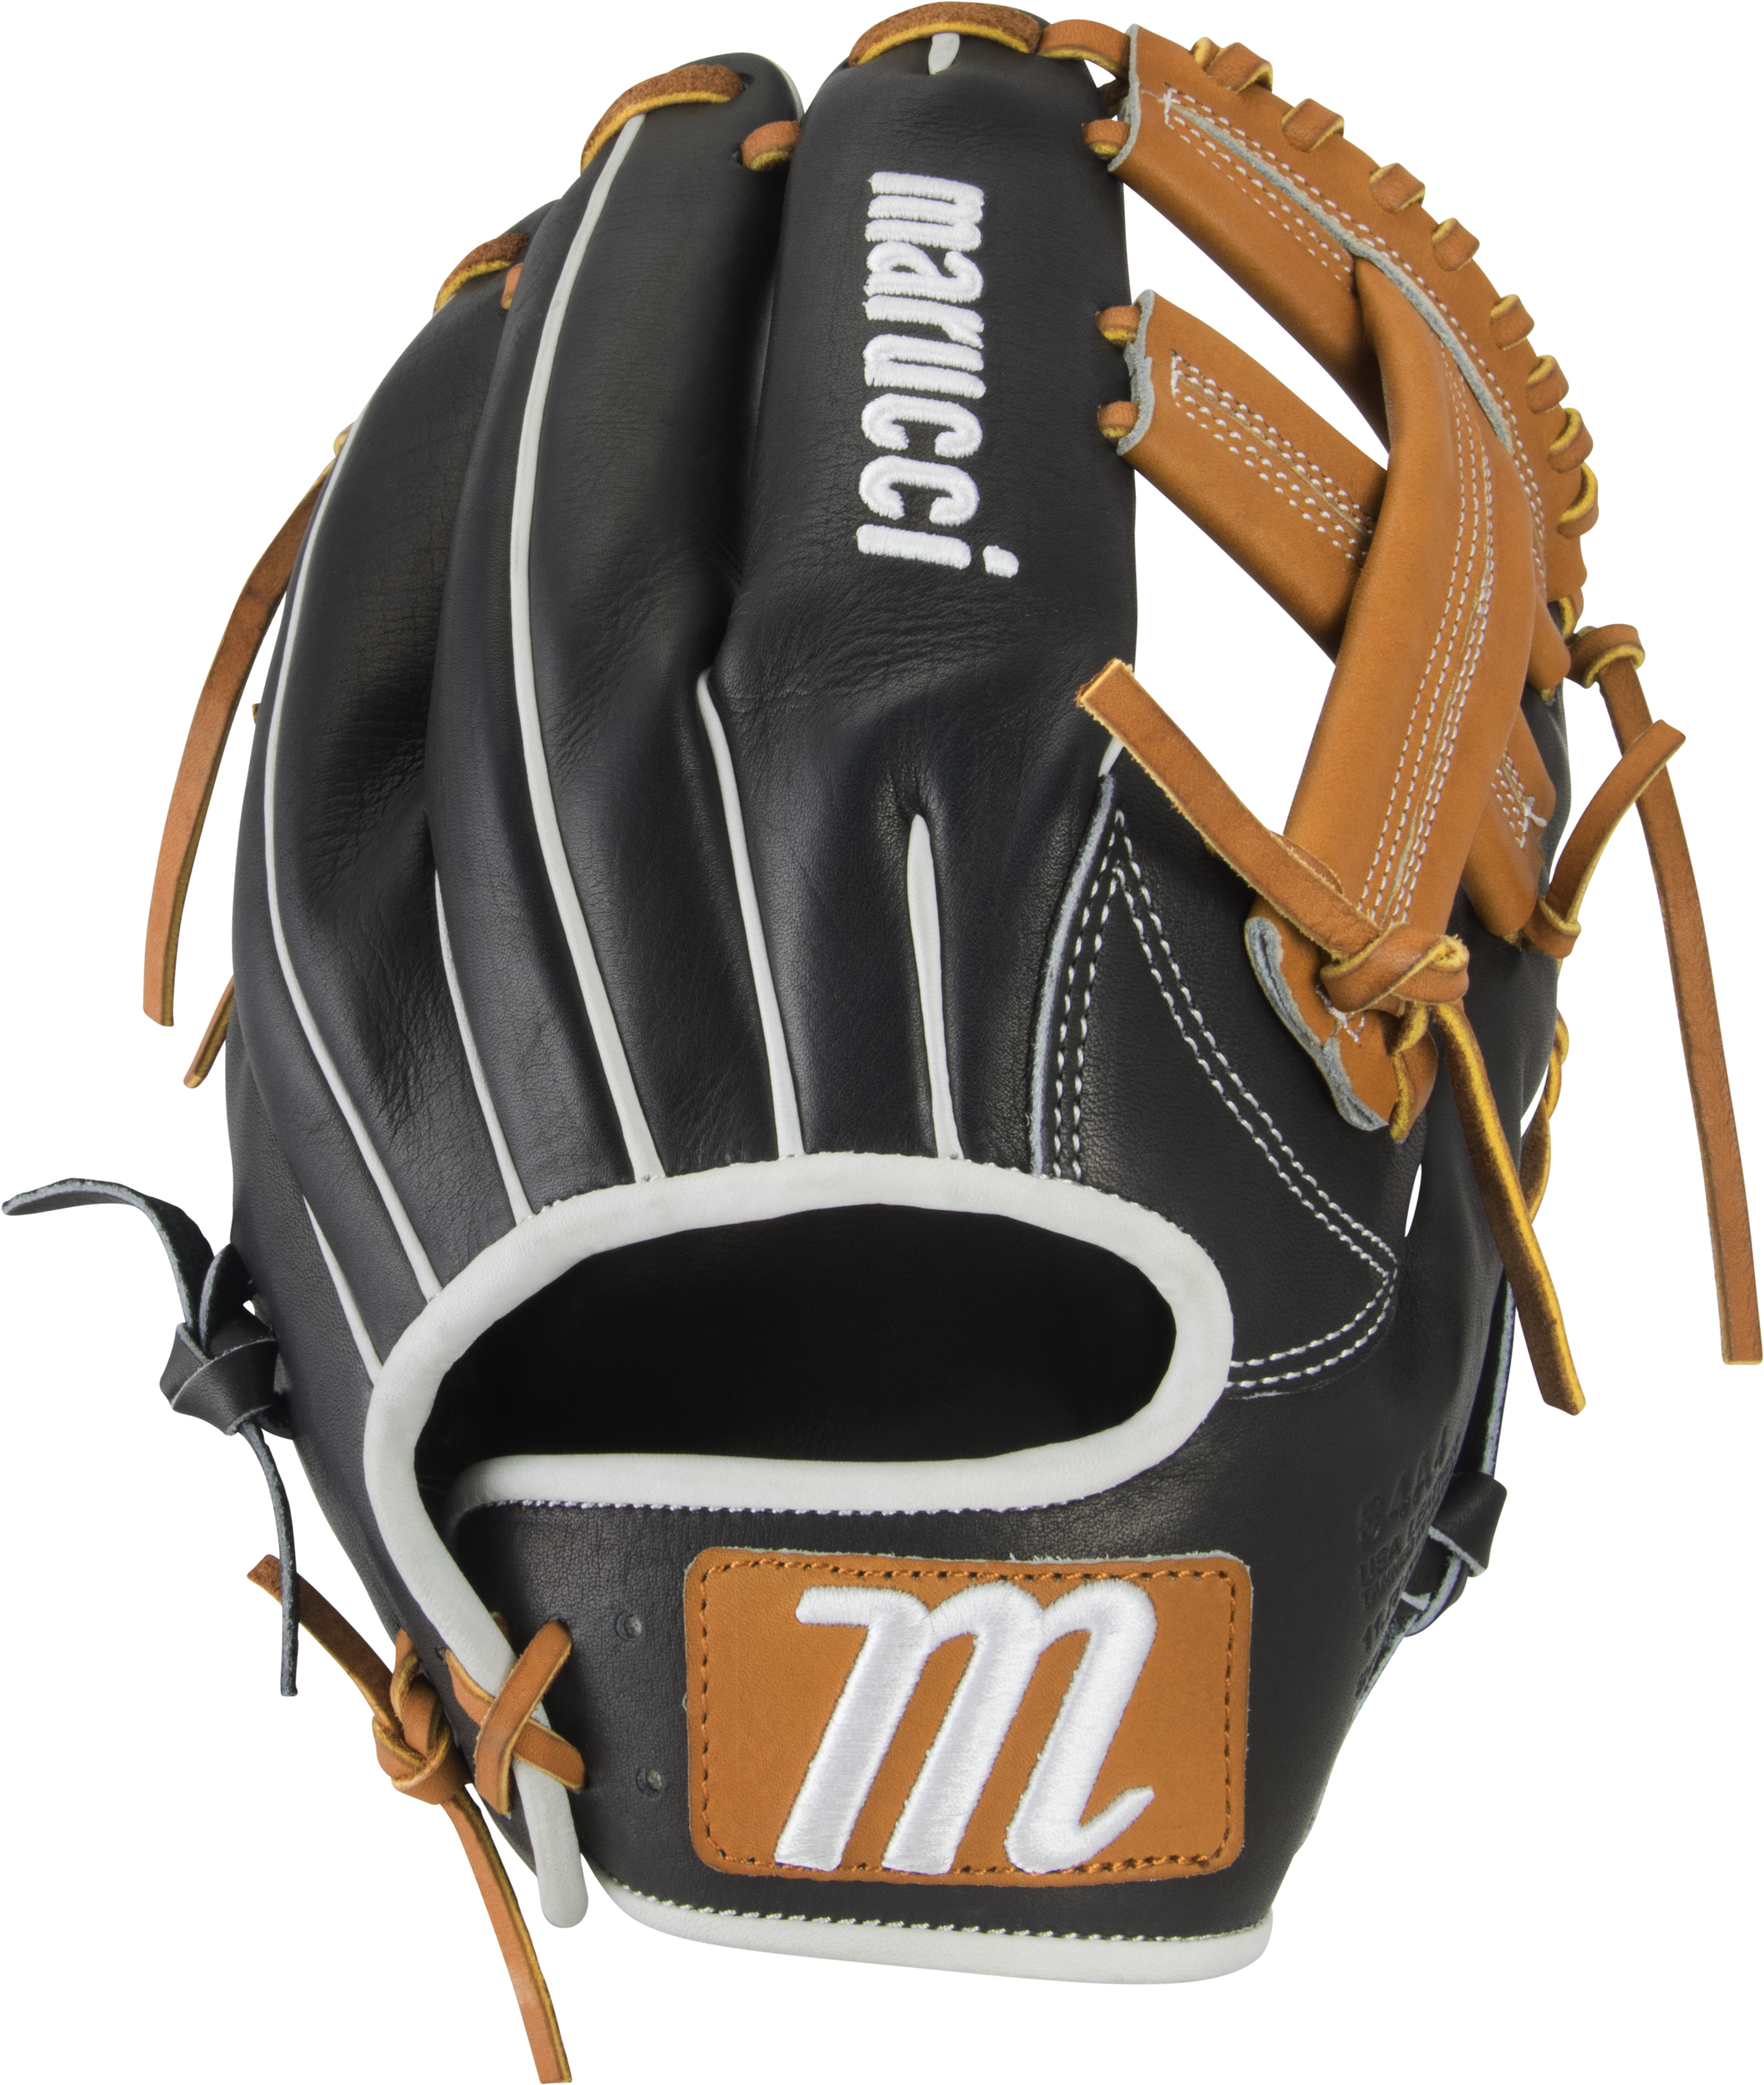 marucci-capitol-11-75-baseball-glove-54a4-single-post-web-right-hand-throw MFGCP54A4-BKTF-RightHandThrow Marucci  849817099223  Premium Japanese-tanned USA Kip leather combines ideal stiffness with lightweight feel